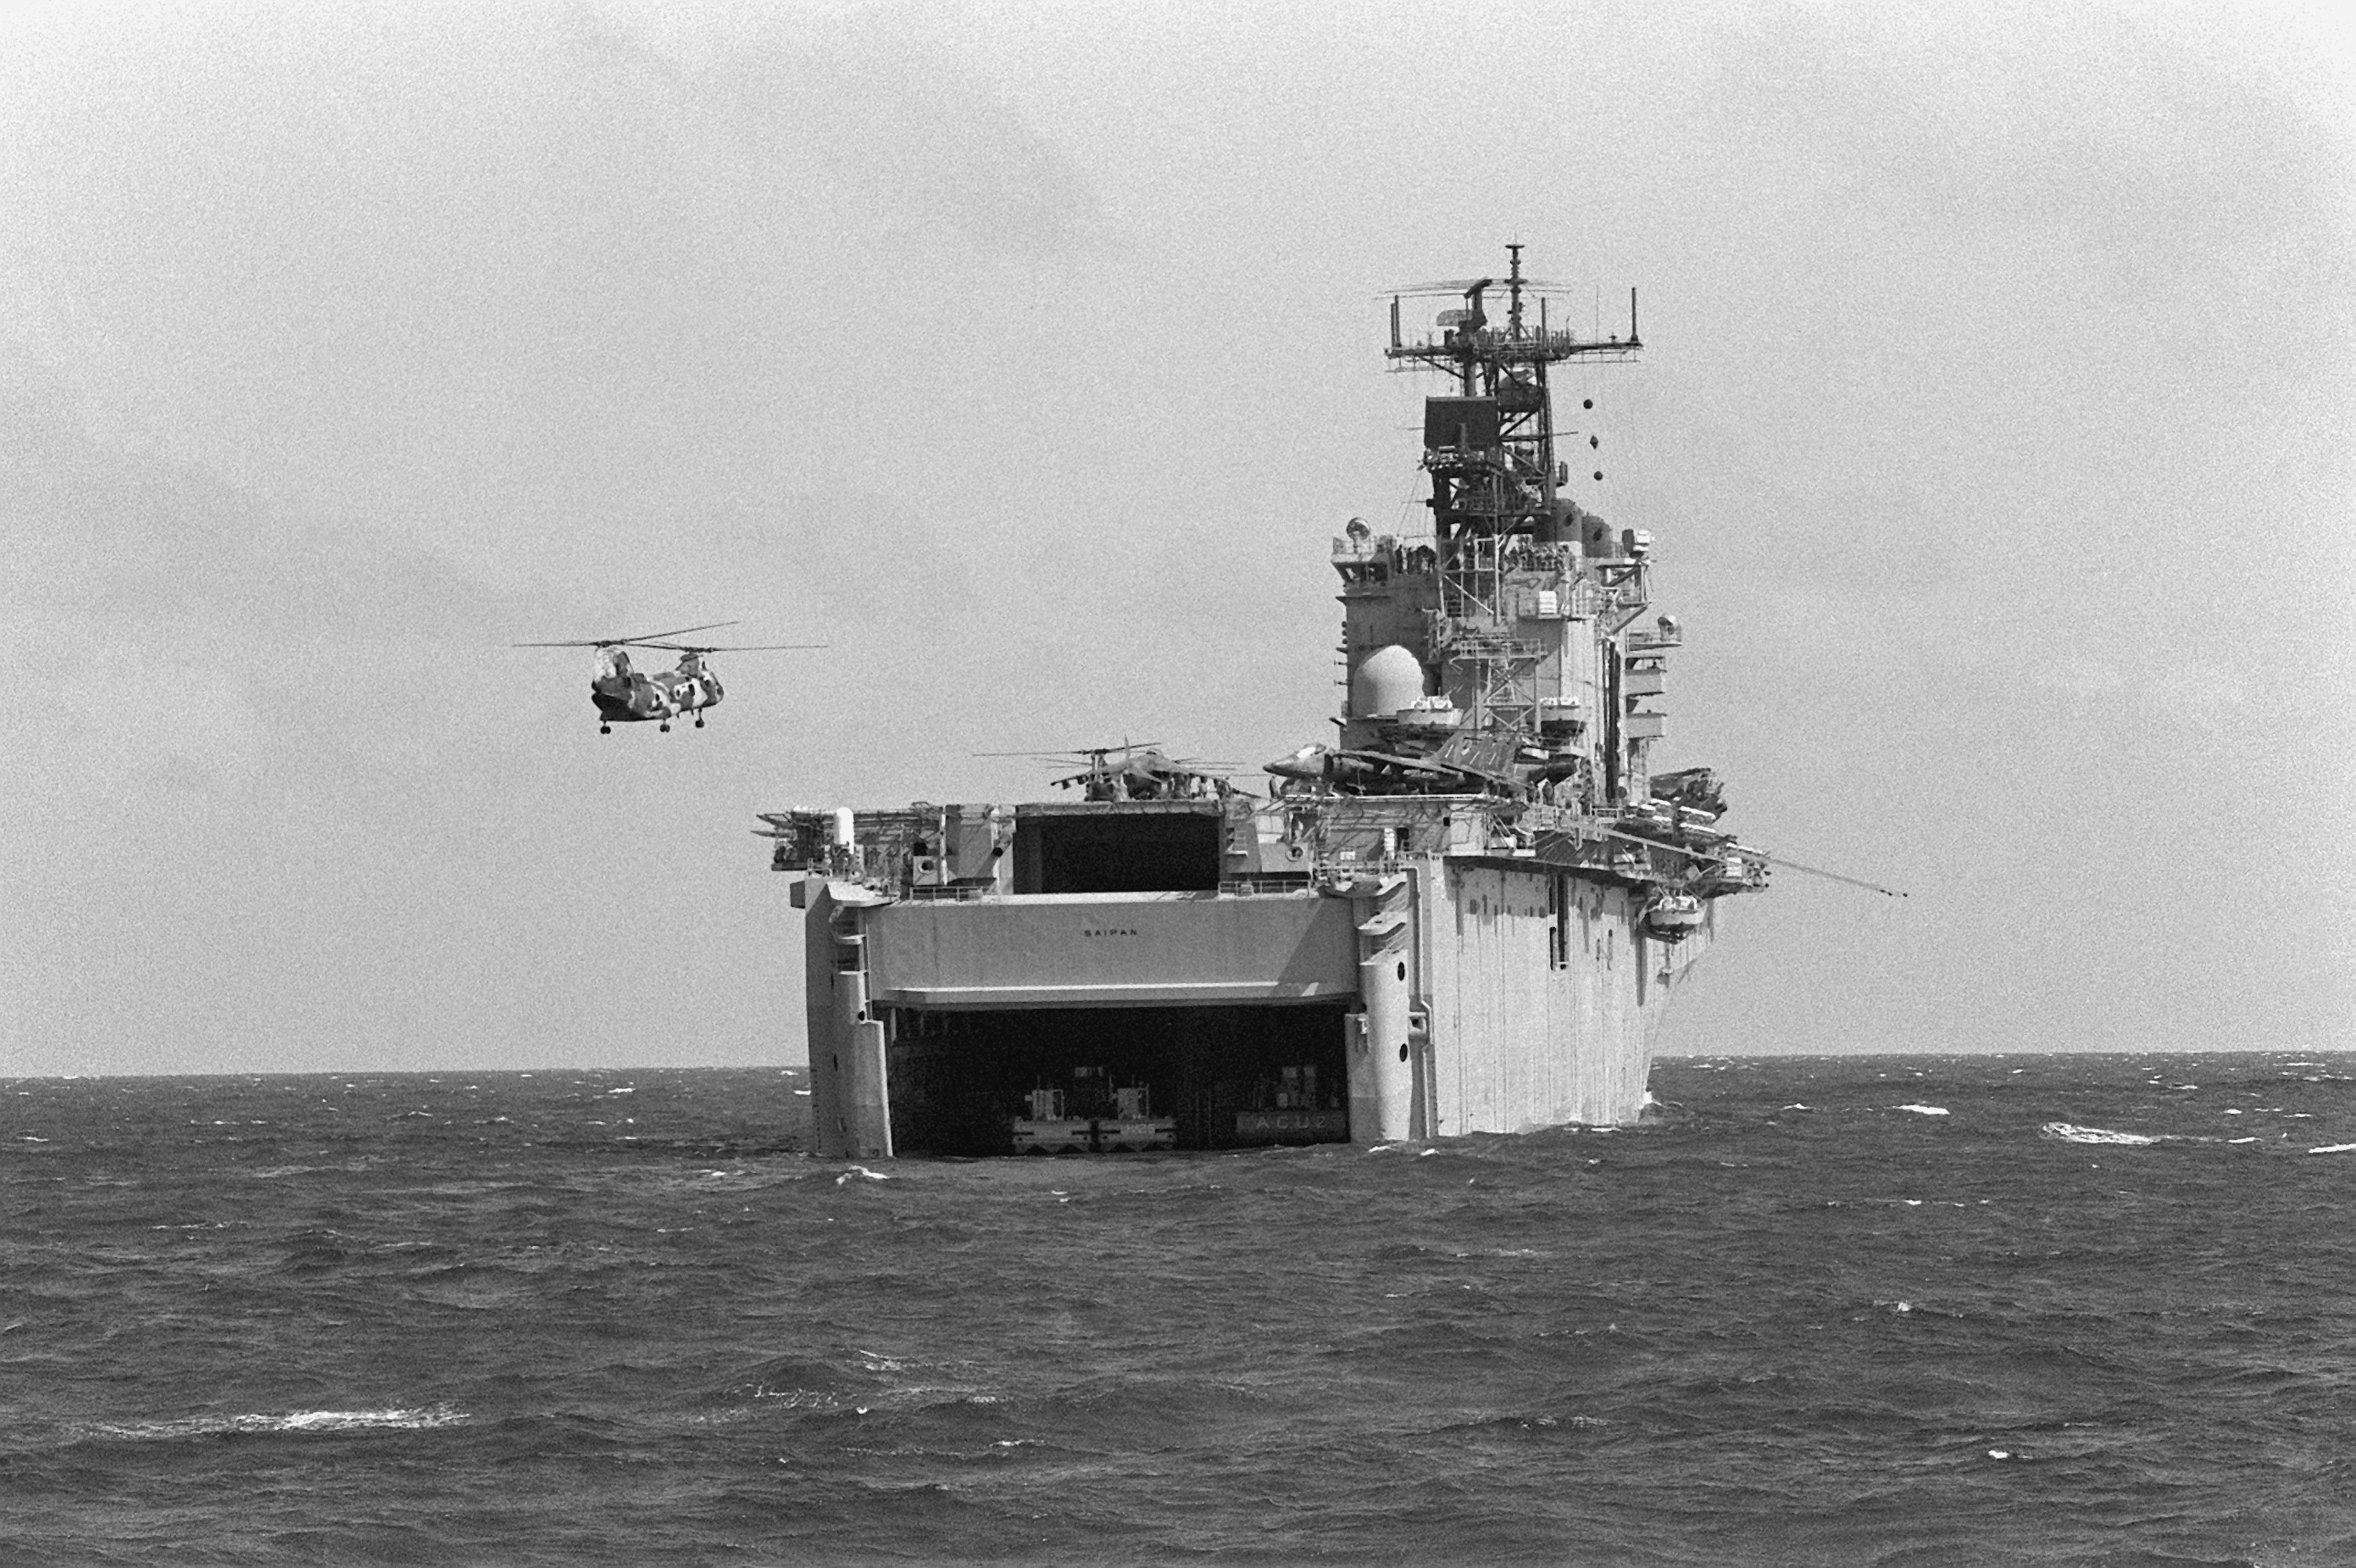 A CH-46E Sea Knight helicopter approaches amphibious dock landing